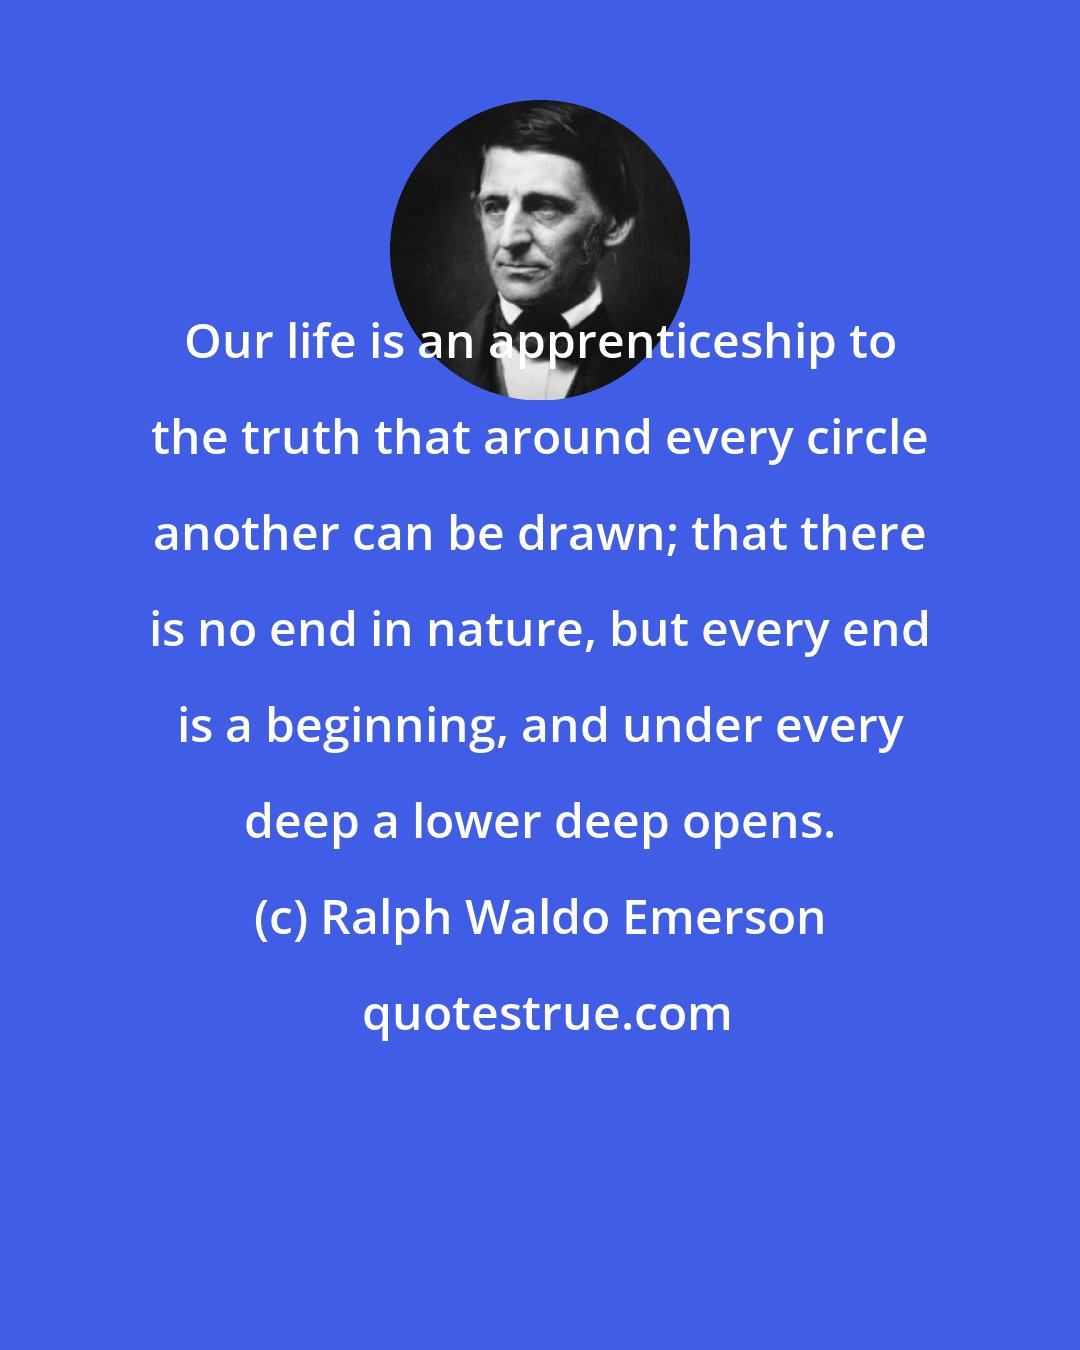 Ralph Waldo Emerson: Our life is an apprenticeship to the truth that around every circle another can be drawn; that there is no end in nature, but every end is a beginning, and under every deep a lower deep opens.